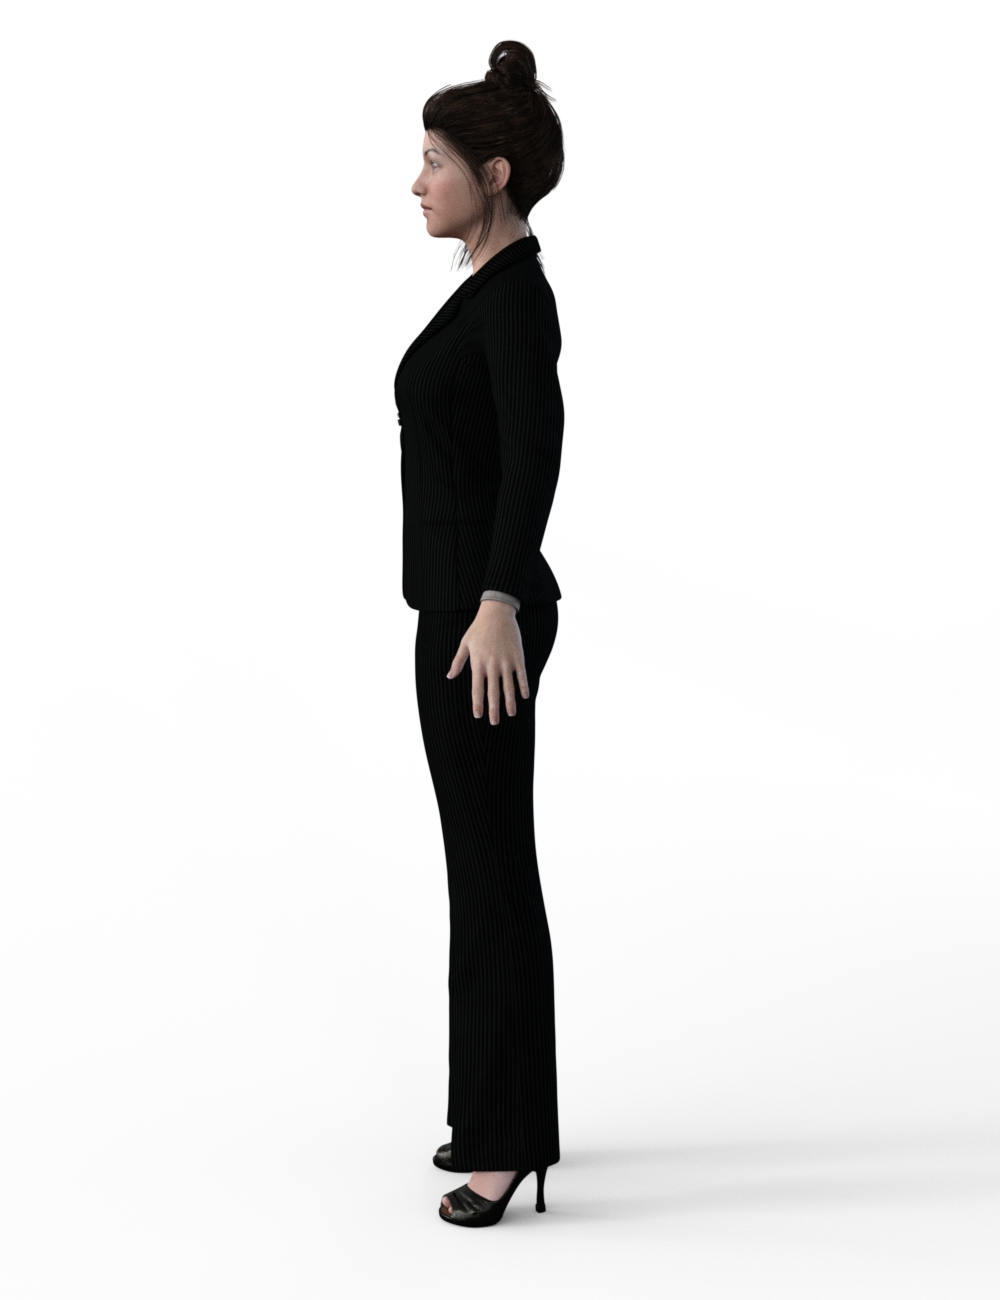 FBX- Base Female New York Business Outfit by: Paleo, 3D Models by Daz 3D